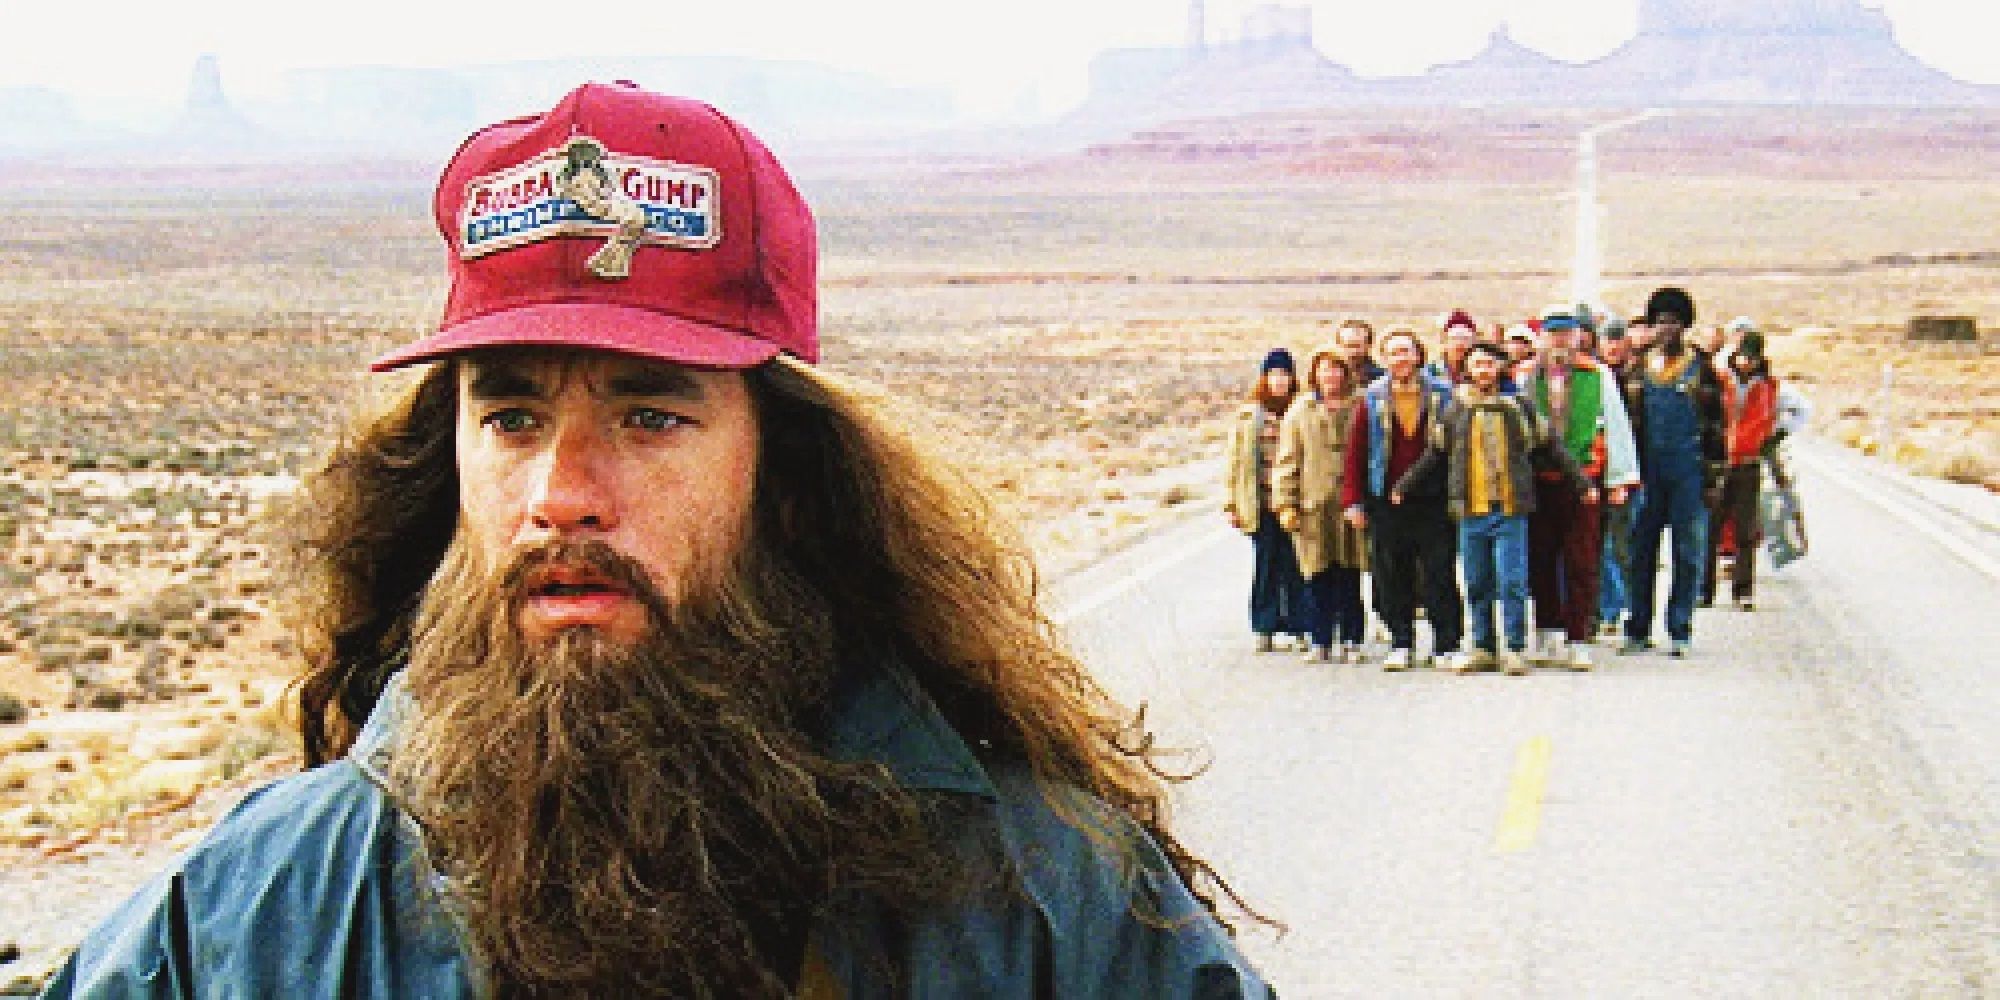 Forrest stops on his run with a crowd behind him in Forrest Gump